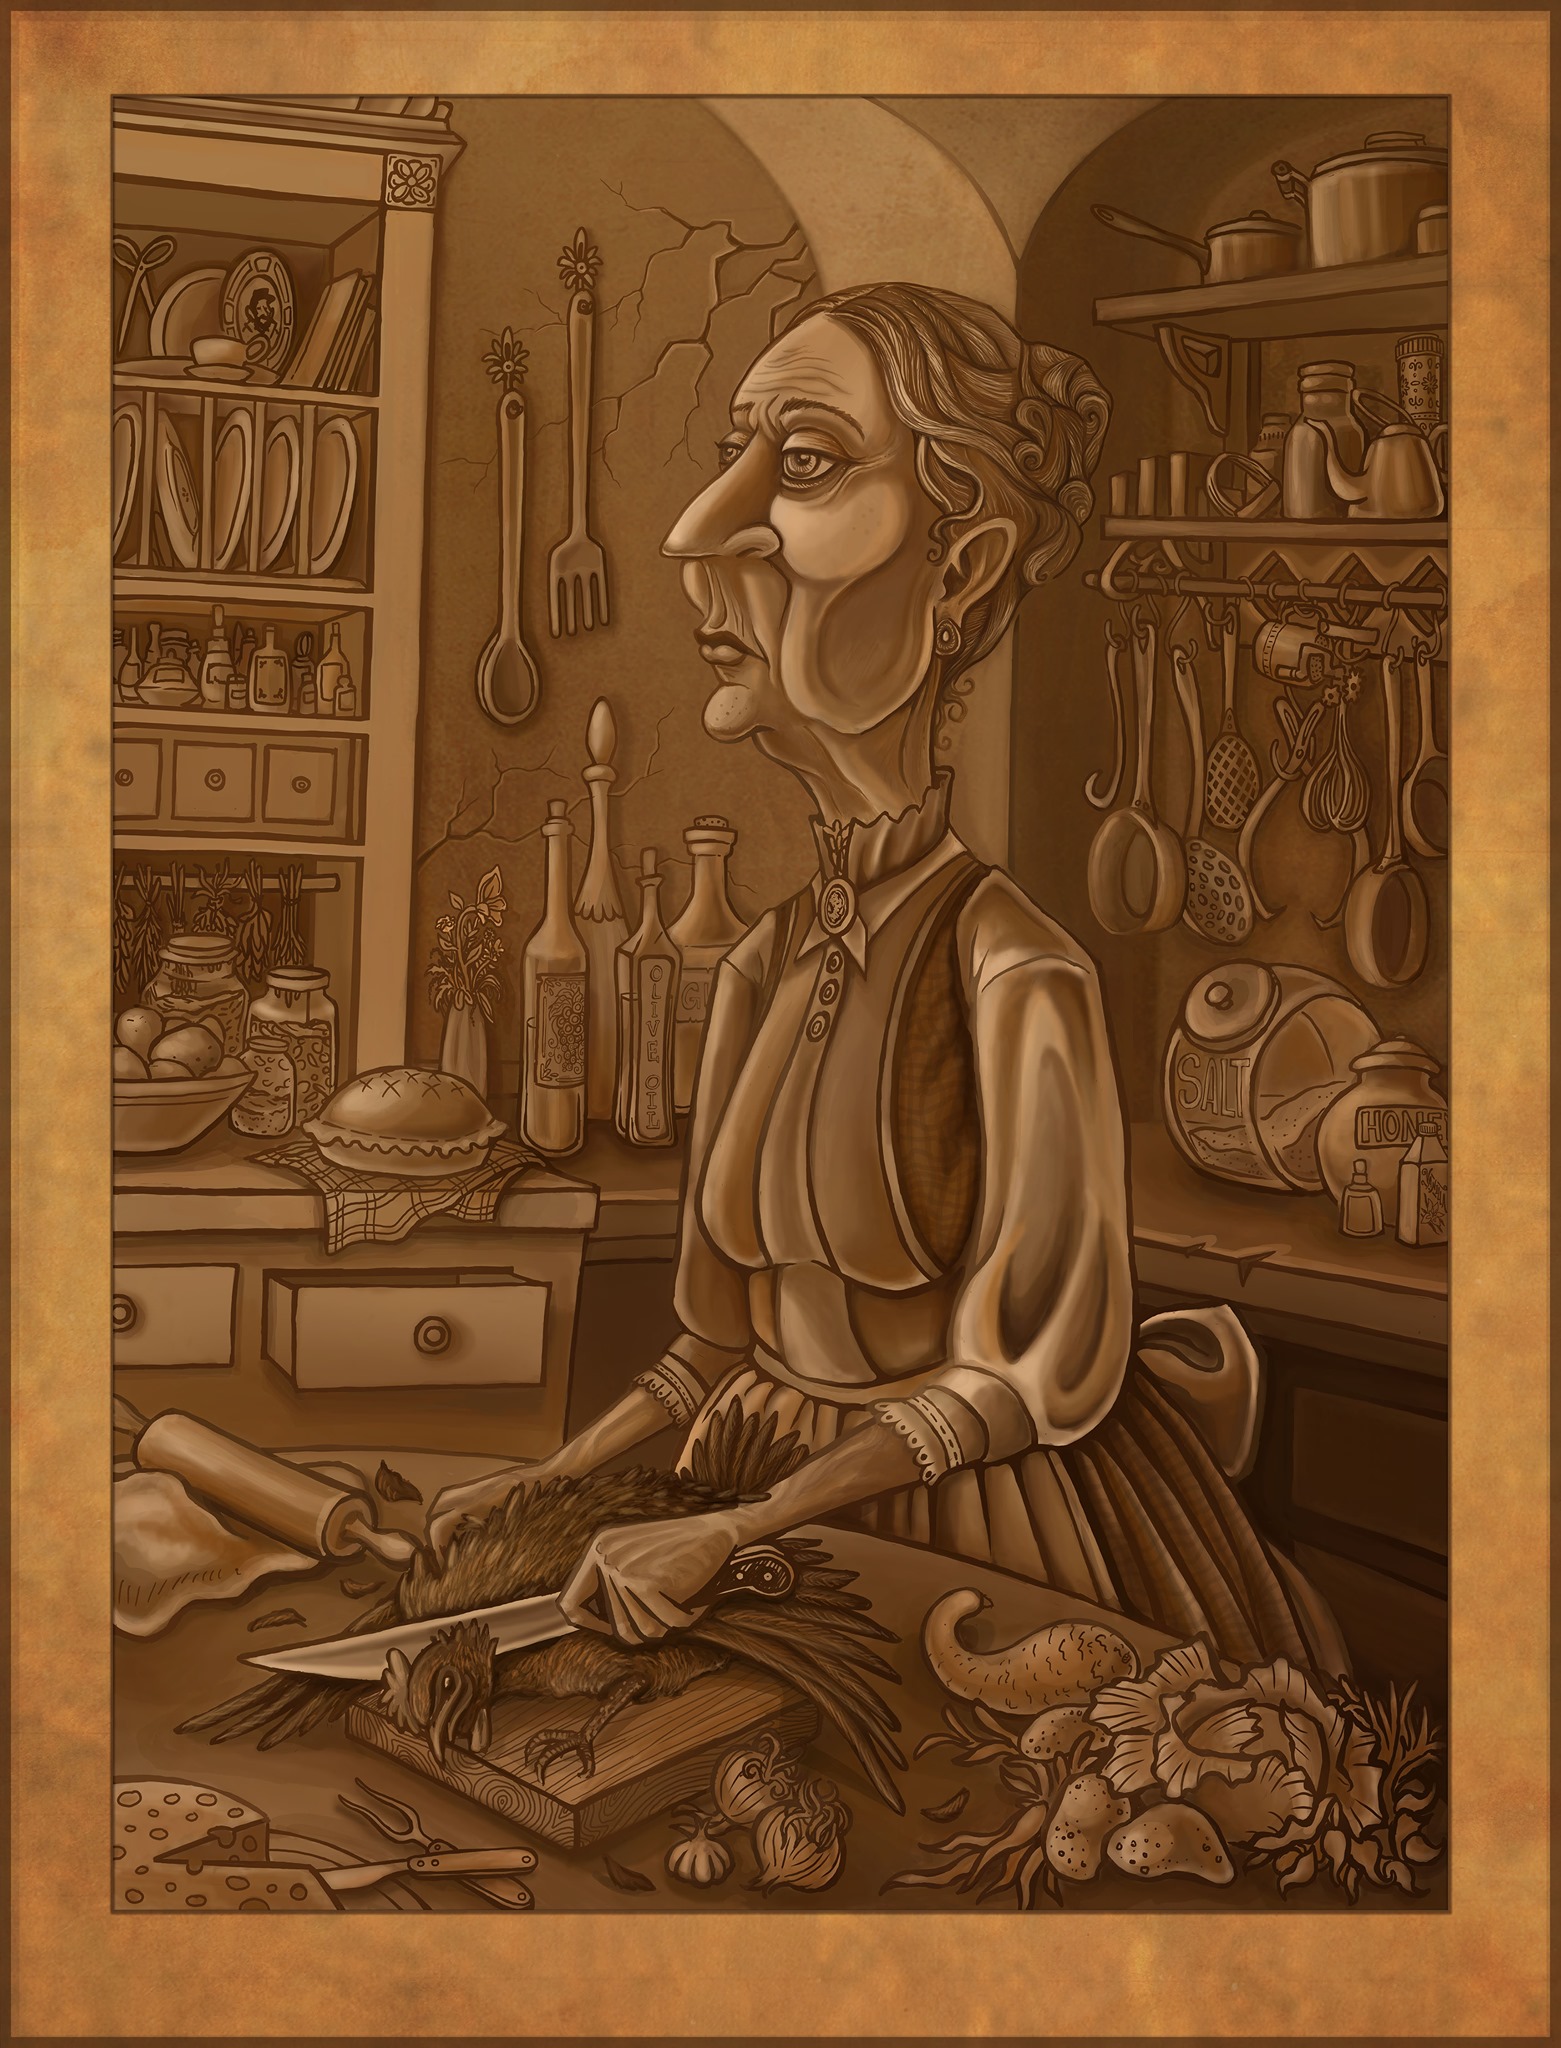 Victorian sepia tone woman maid cook in kitchen chopping chicken. Childrens book fantasy illustration